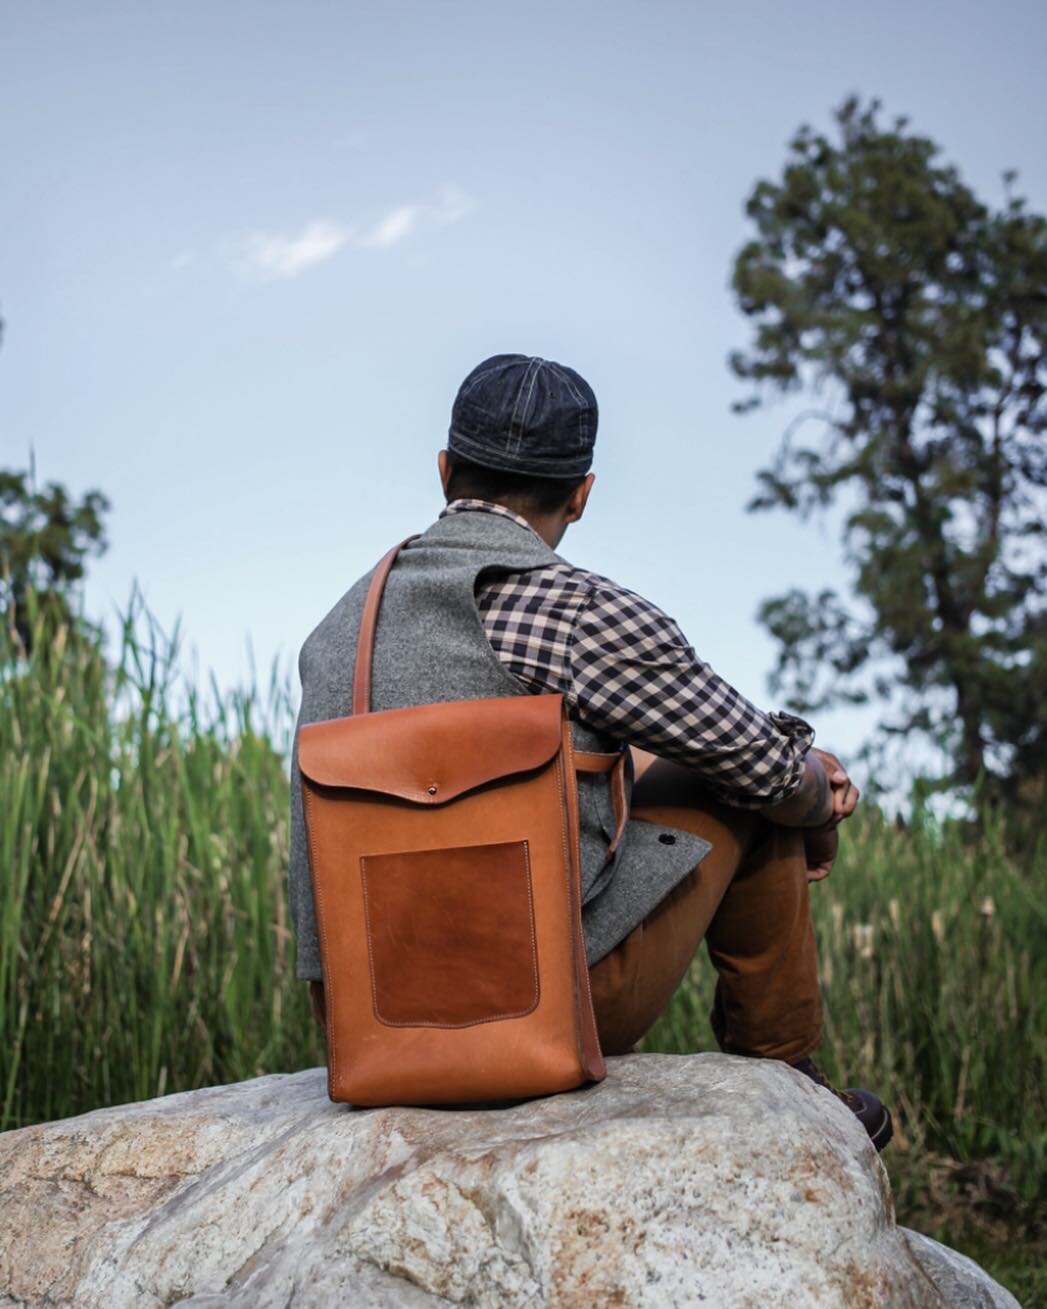 Here&rsquo;s to having the right tools for the job! -BRIGG- Fall 19 🍻#leatherbag #lifestyle #gooutside #rugged #friday #weekendvibes #vegan